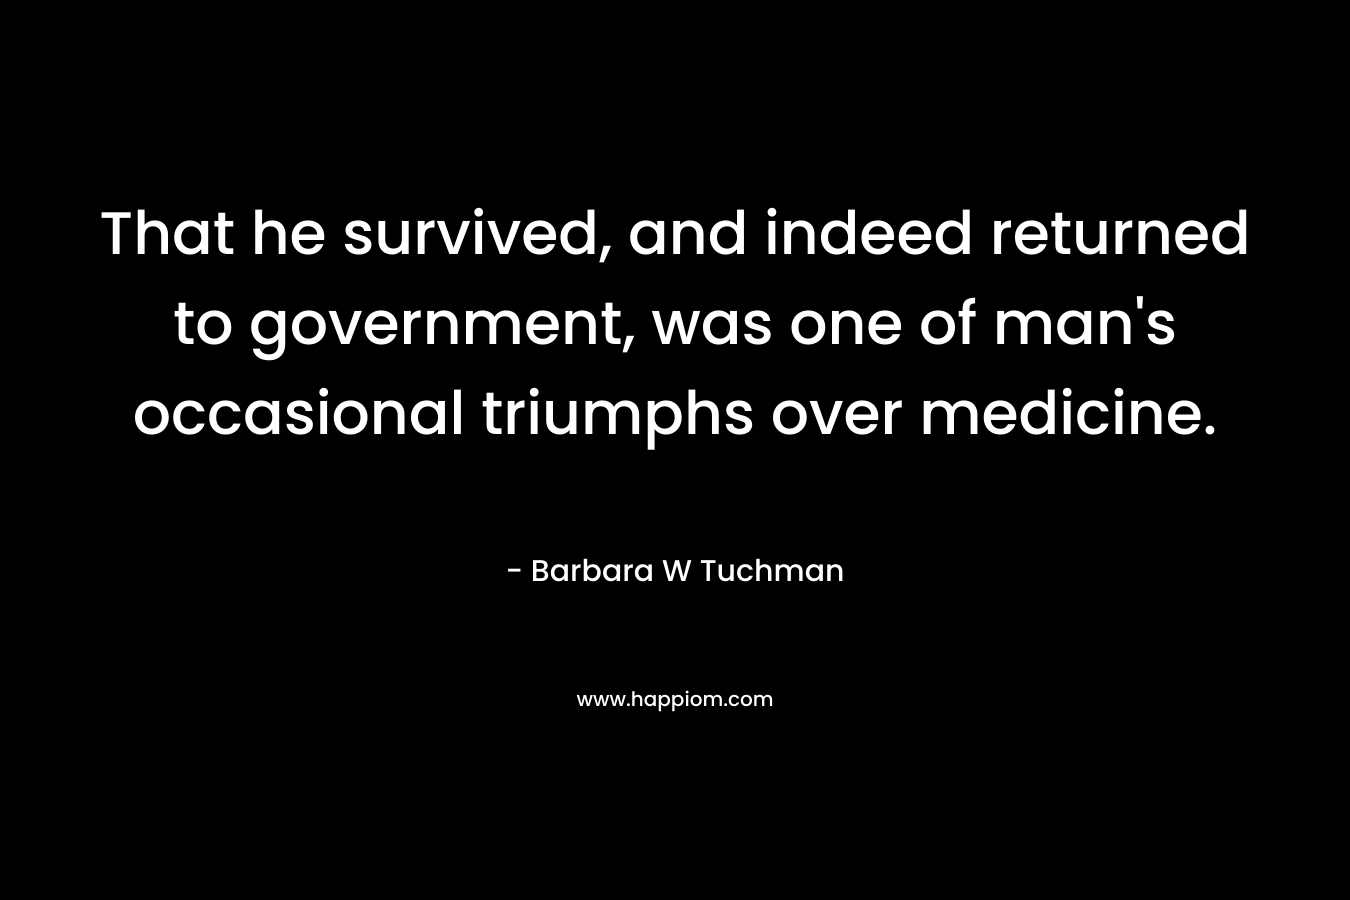 That he survived, and indeed returned to government, was one of man’s occasional triumphs over medicine. – Barbara W Tuchman